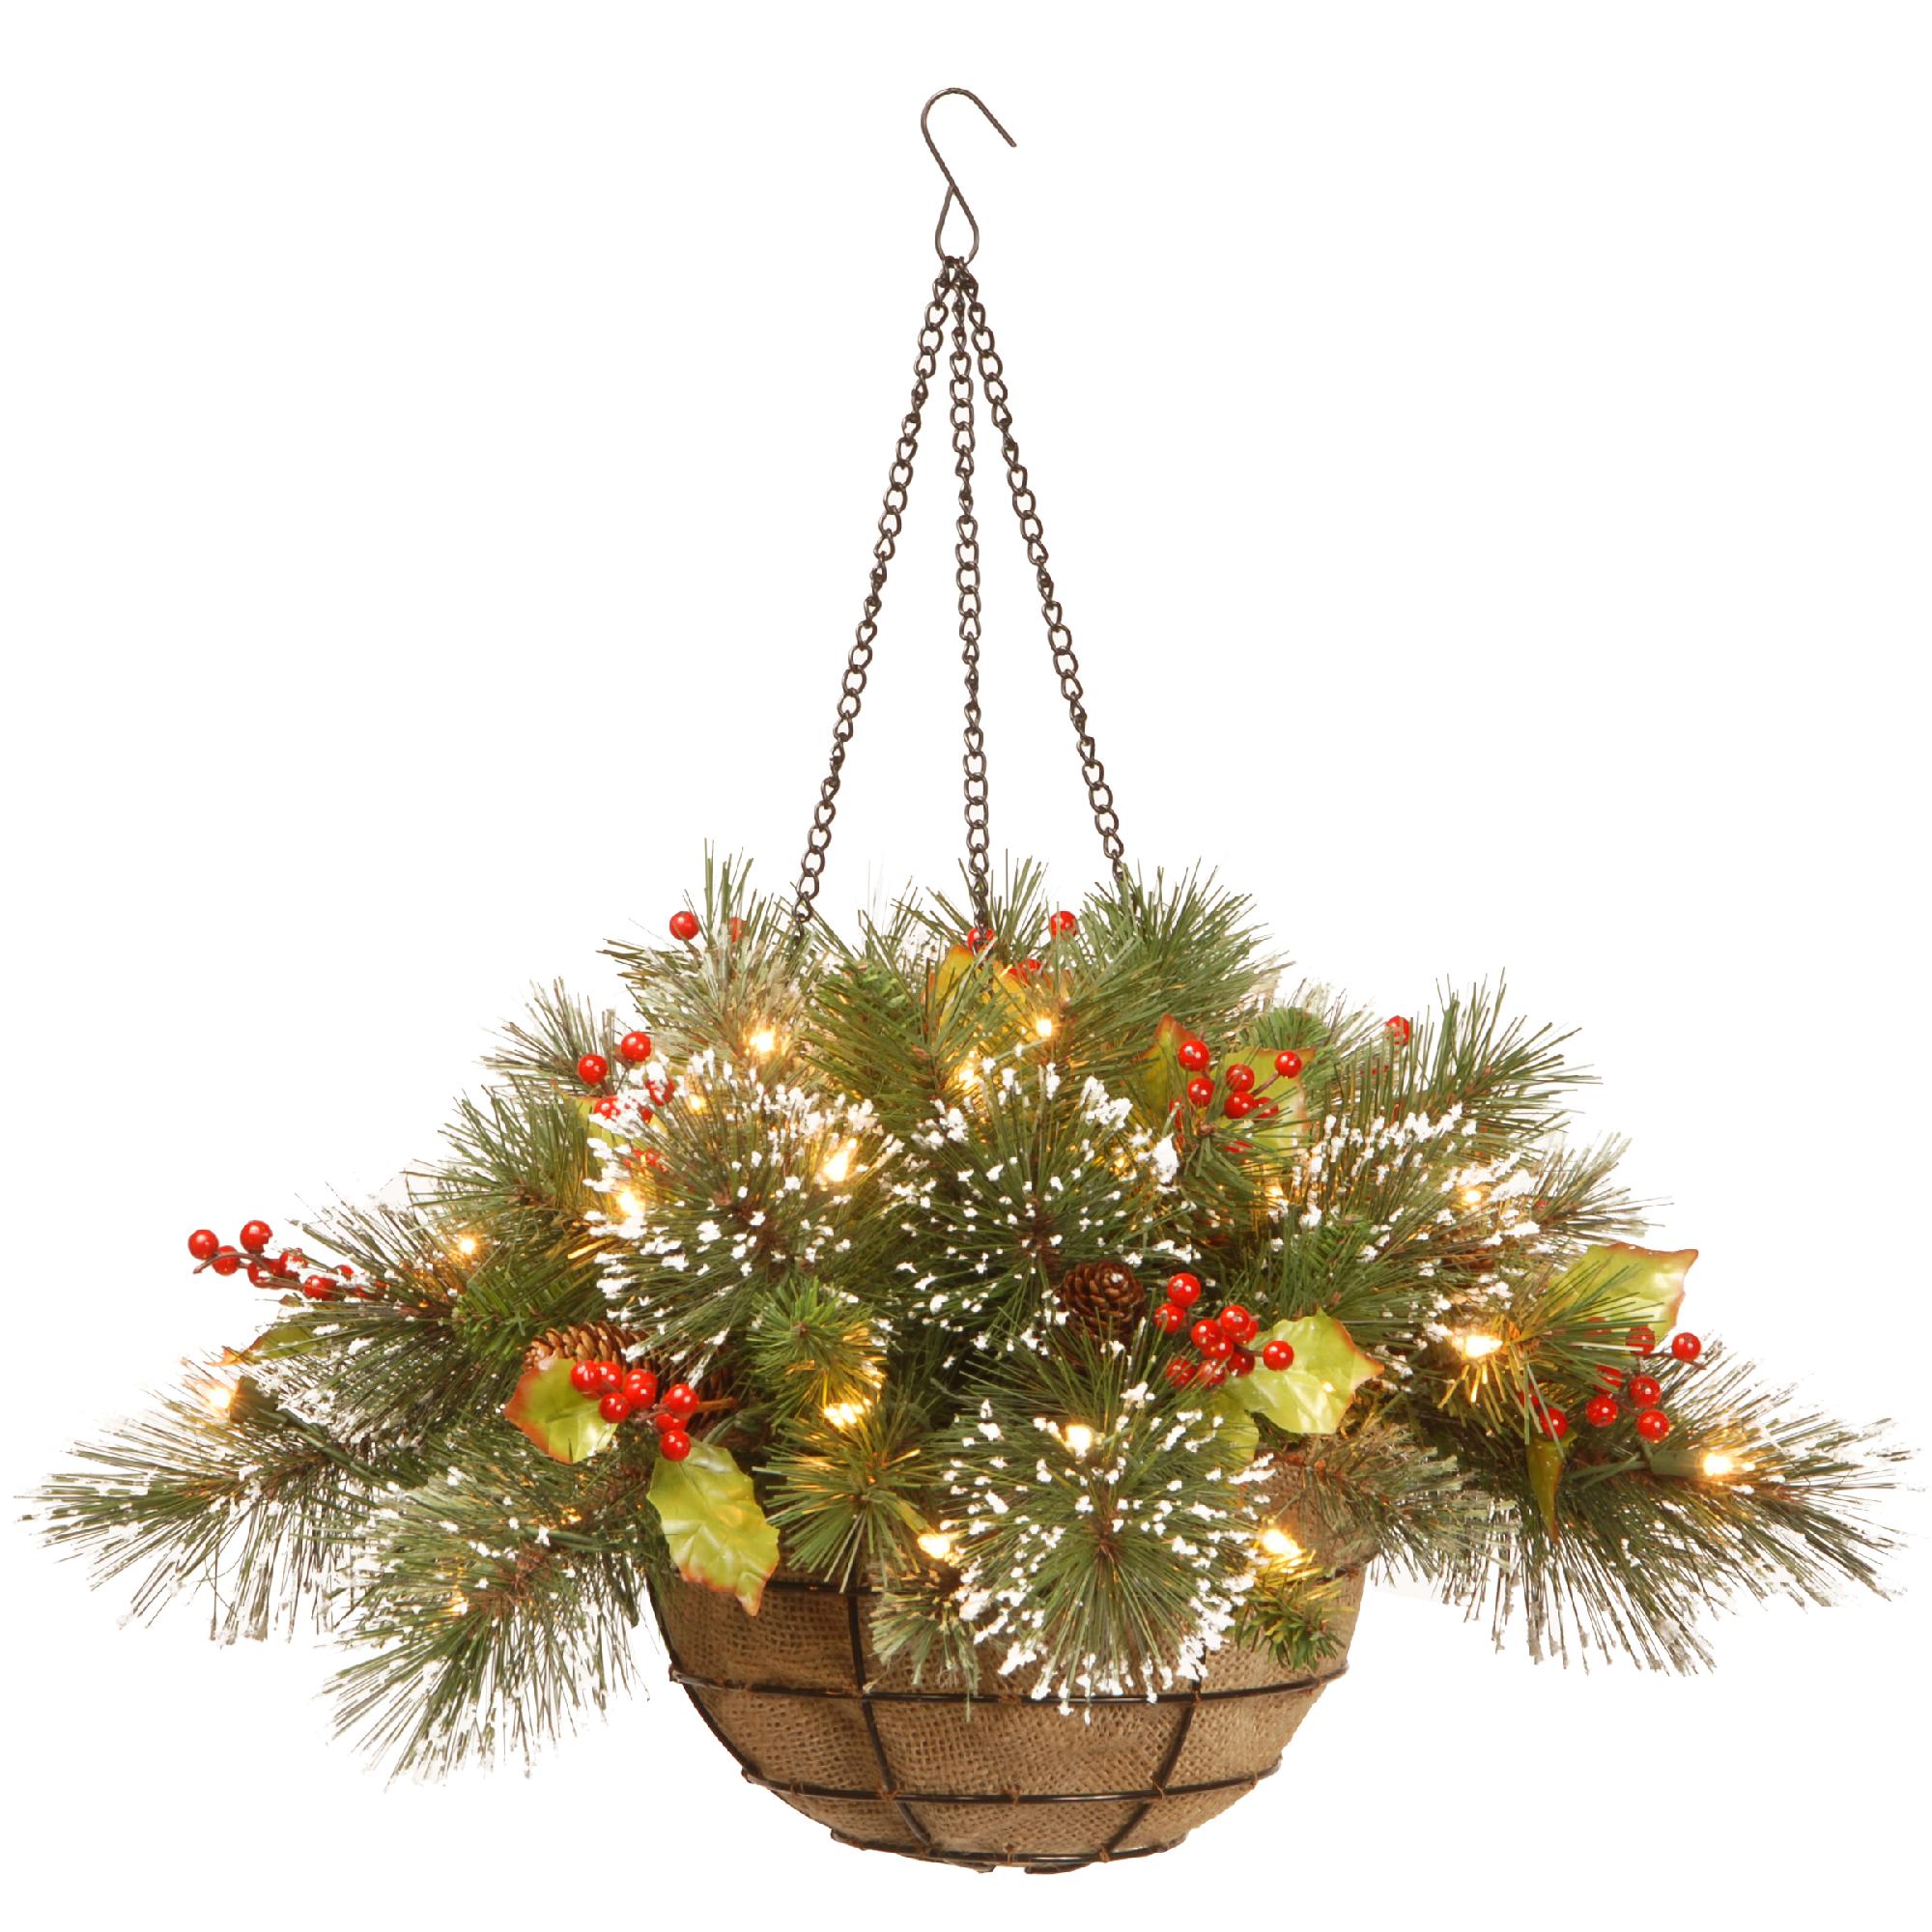 National Tree Company 20" Wintry Pine Hanging Basket with Battery Operated Warm White LED Lights